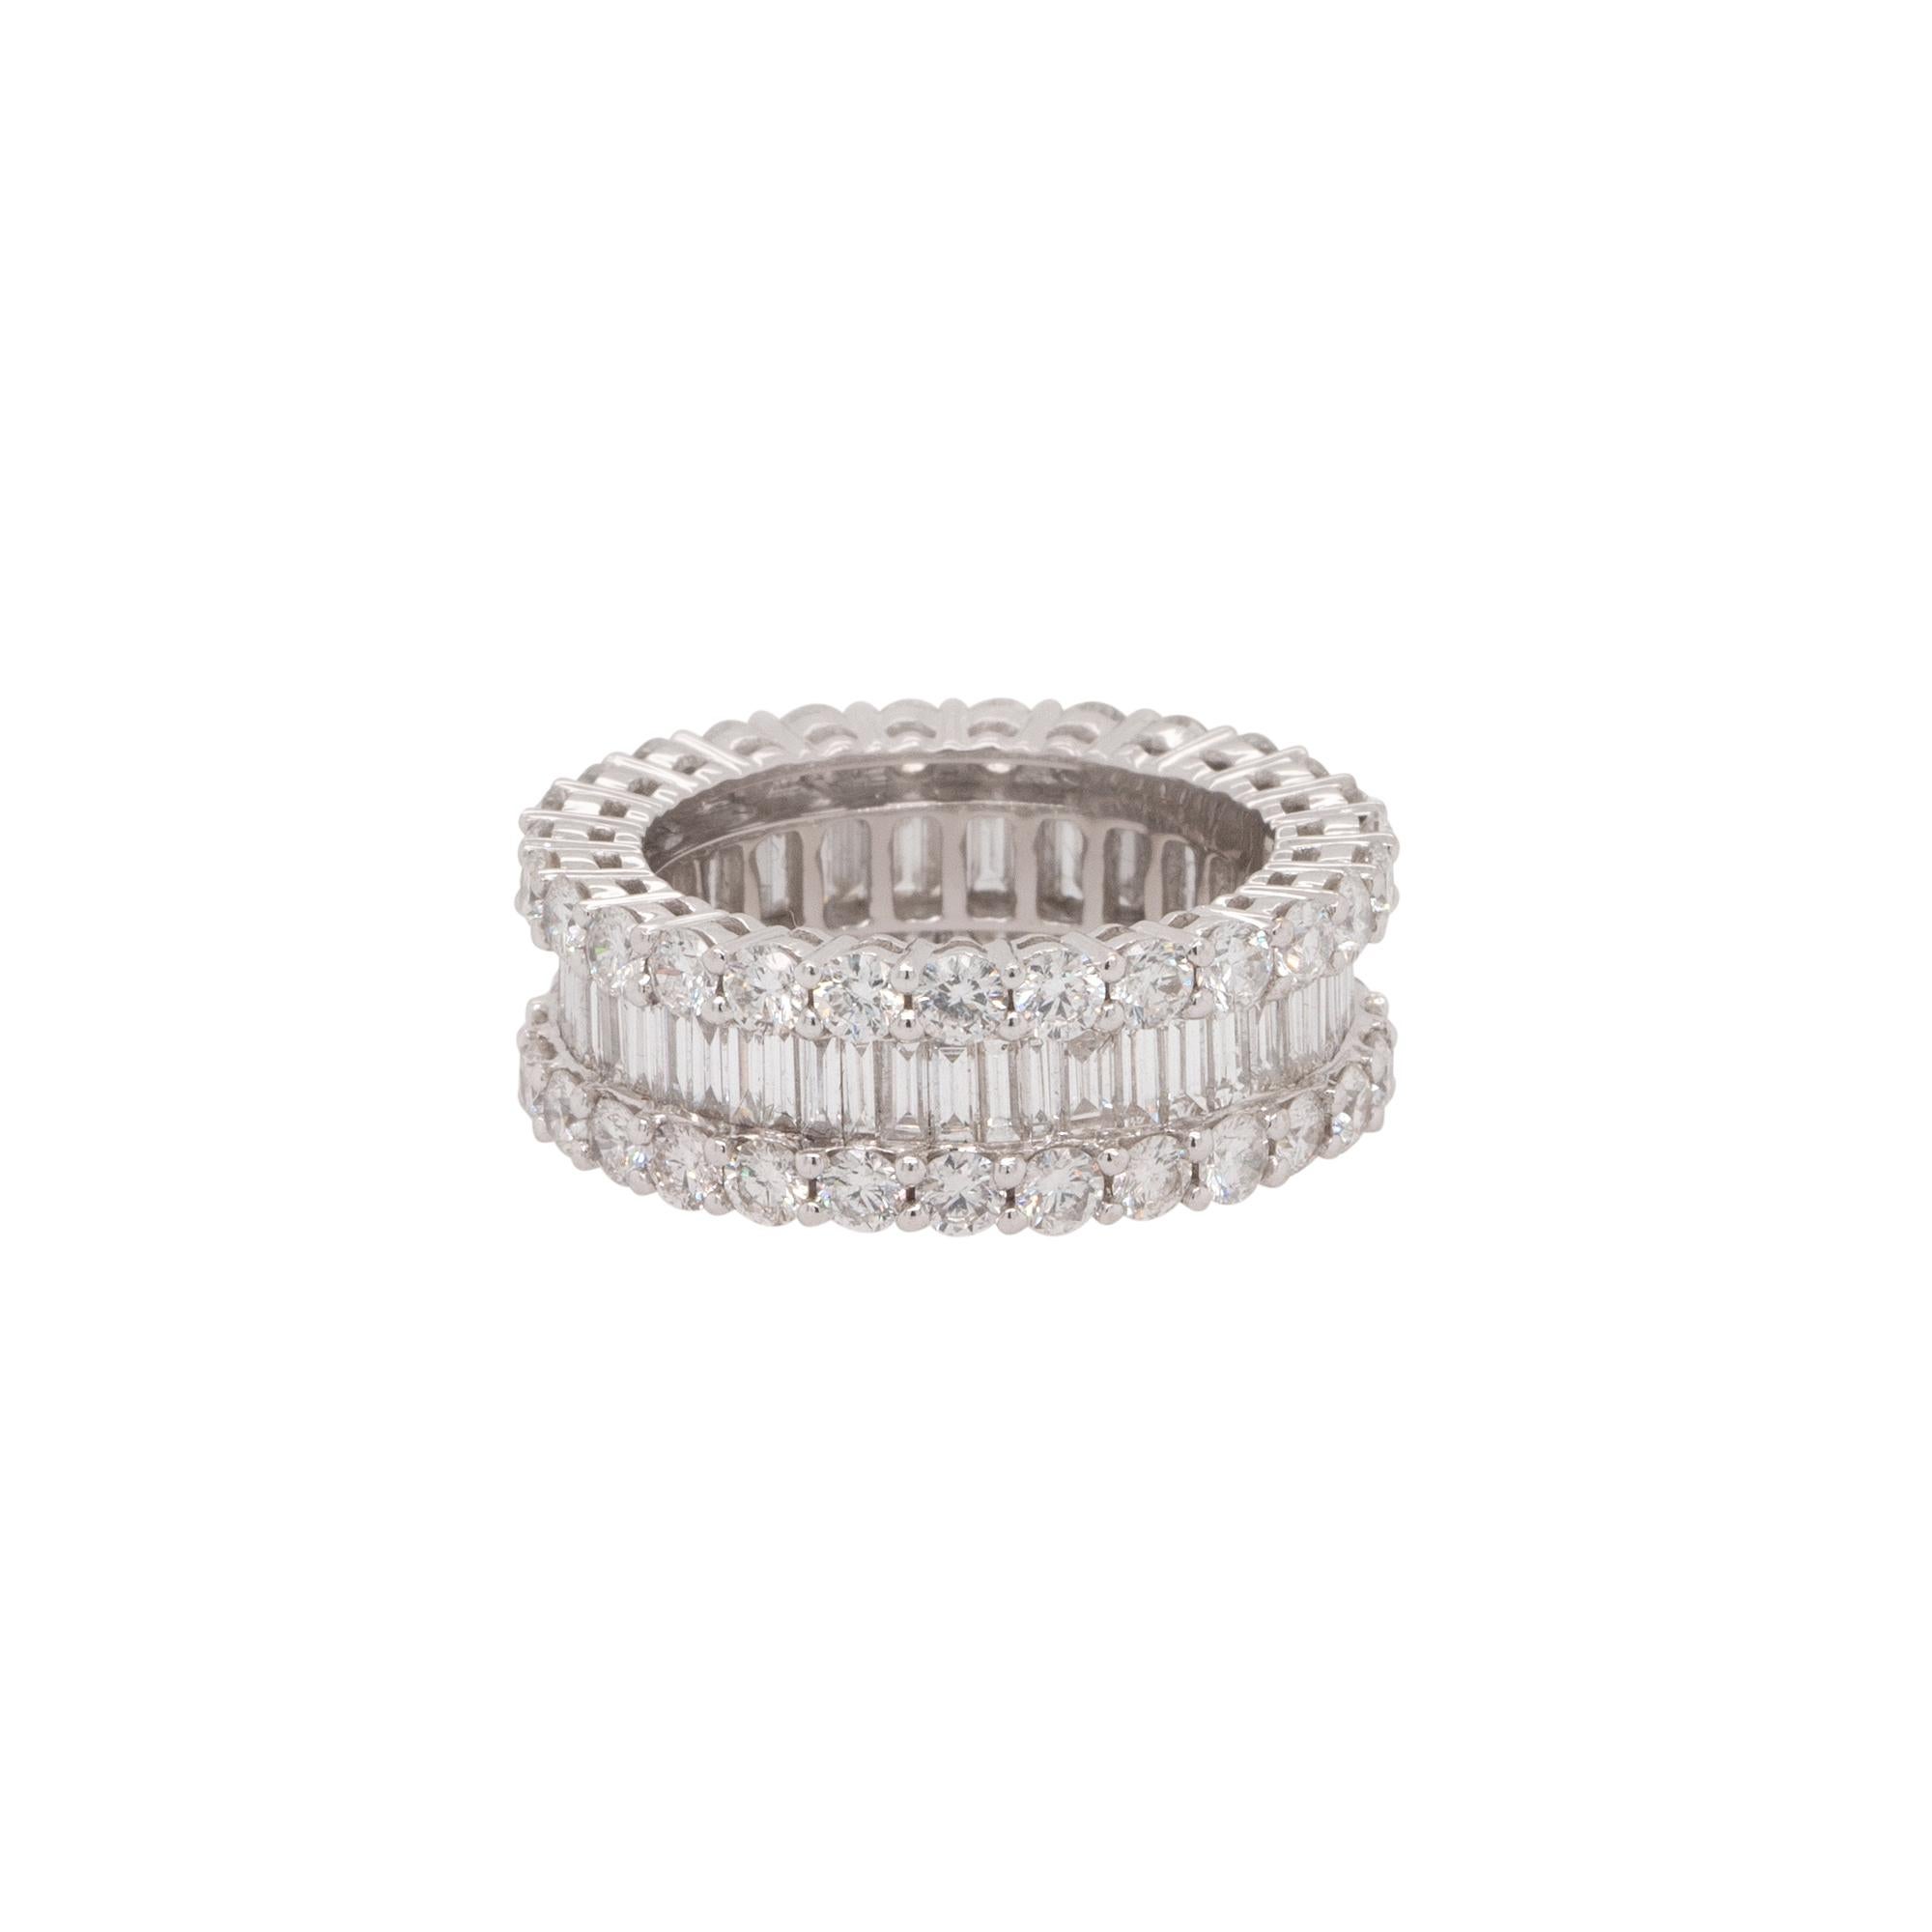 Material: 18k White Gold
Diamond Details: Approx. 5ctw of round cut & baguette cut Diamonds. Diamonds are G/H in color and VS in clarity
Ring Measurements: 24mm x 8mm x 24mm
Ring Size: 7
Total Weight: 8.1g (5.2dwt)
Additional Details: This item